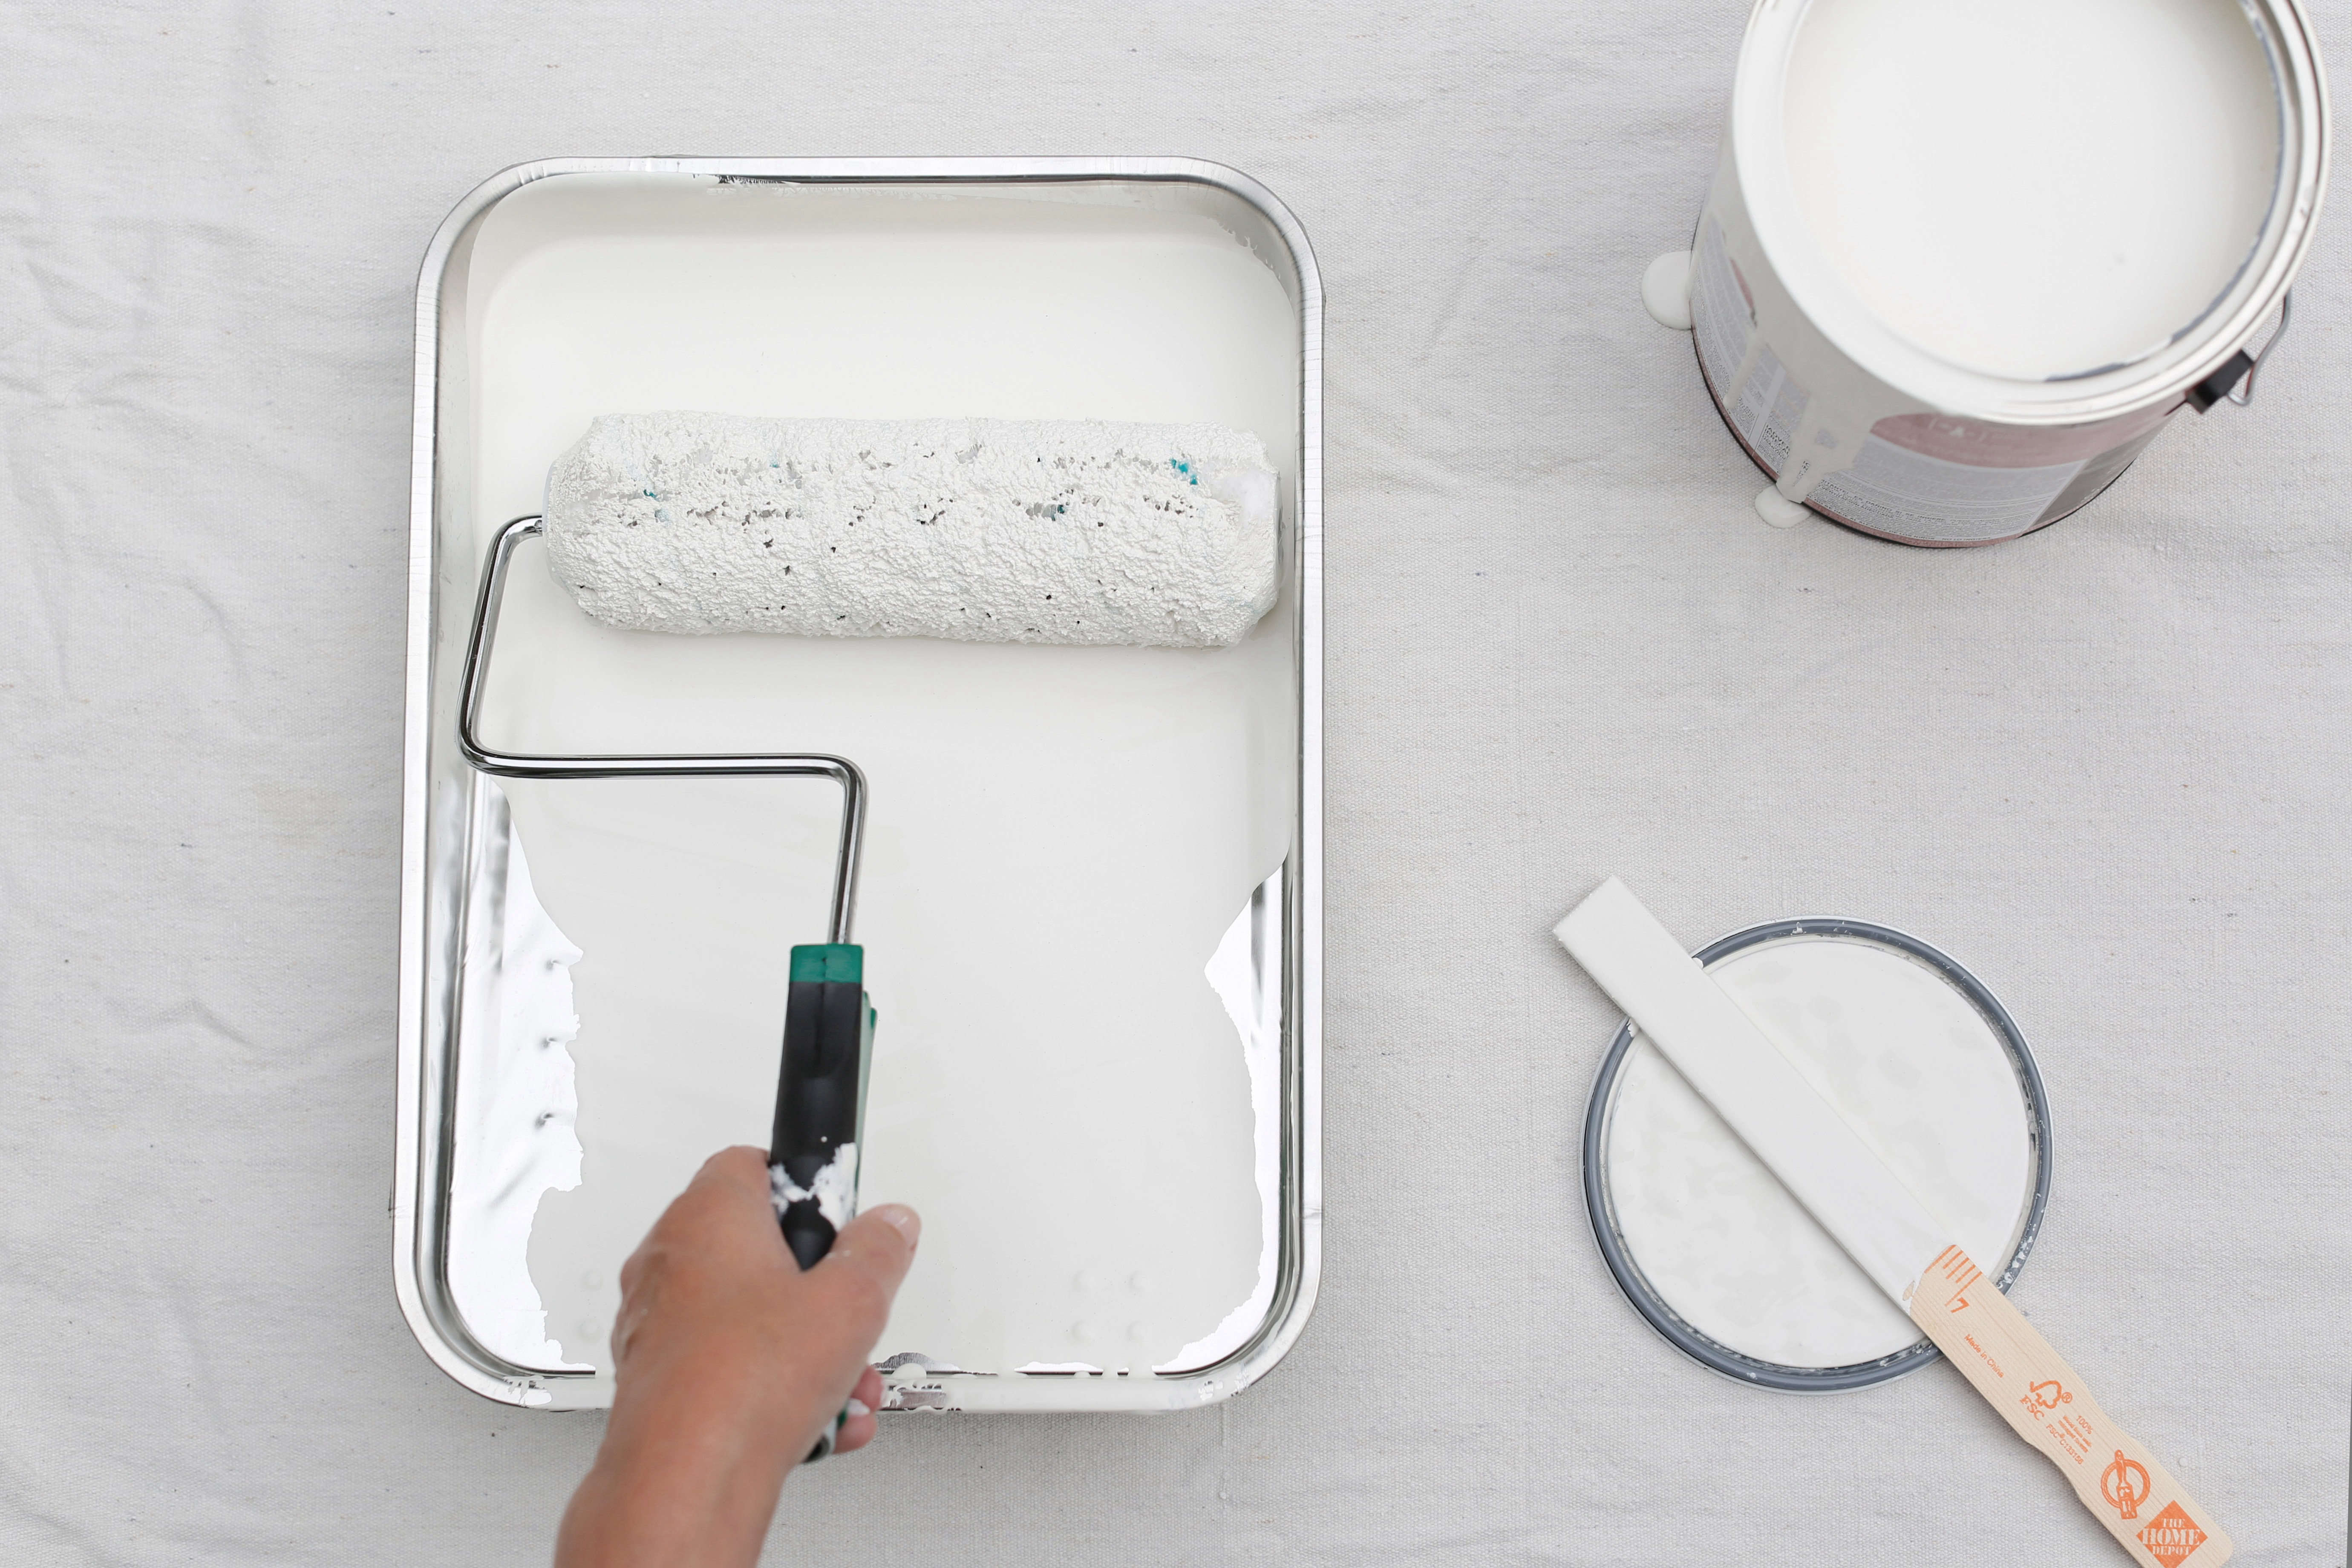 Furniture Painting With A Roller Brush